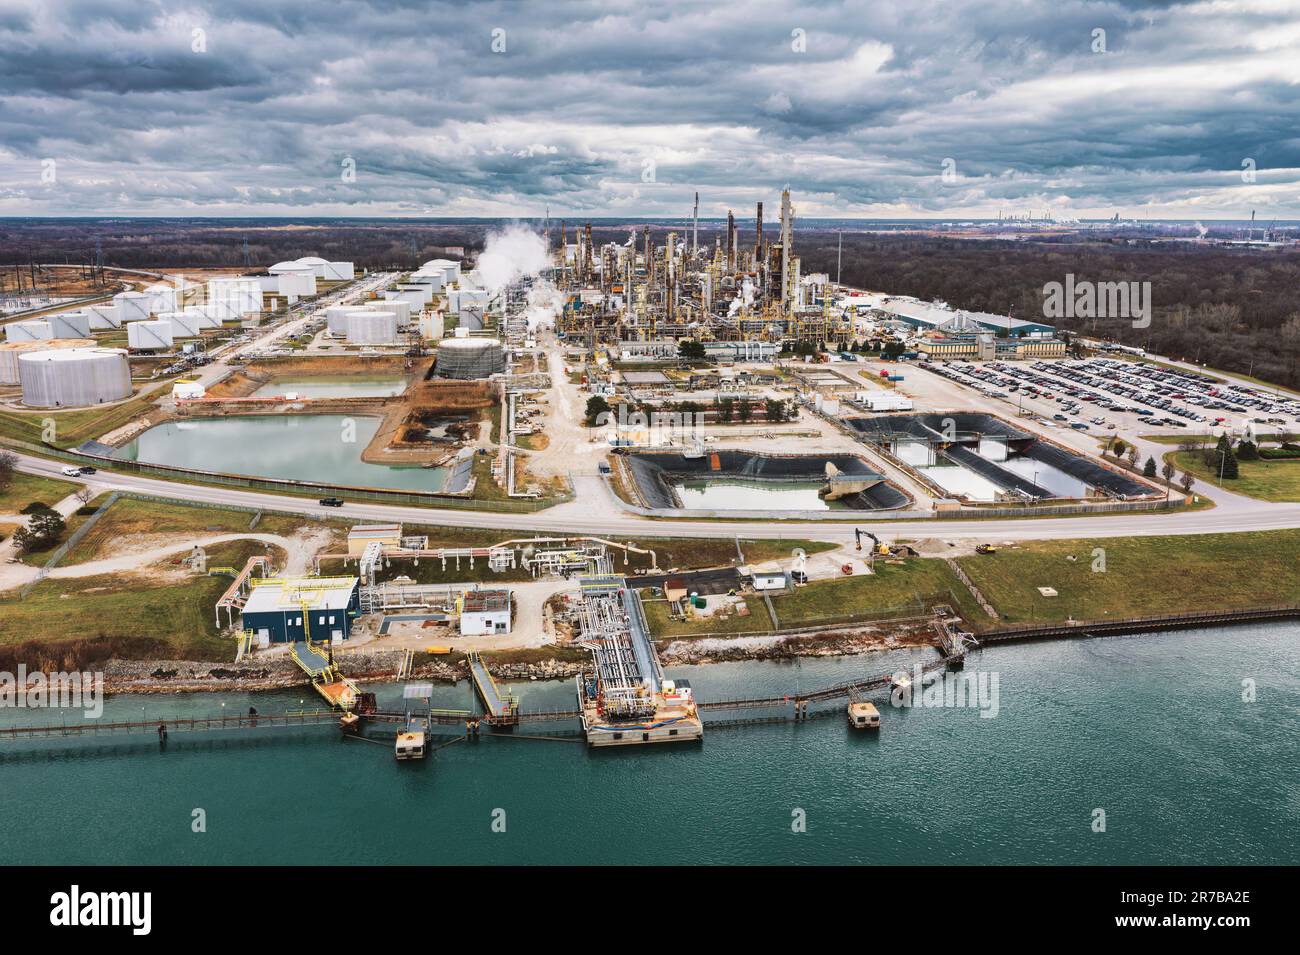 Tanker terminal at Suncor Sarnia refinery, Ontario, Canada on the St. Clair River bordering the U.S. Stock Photo